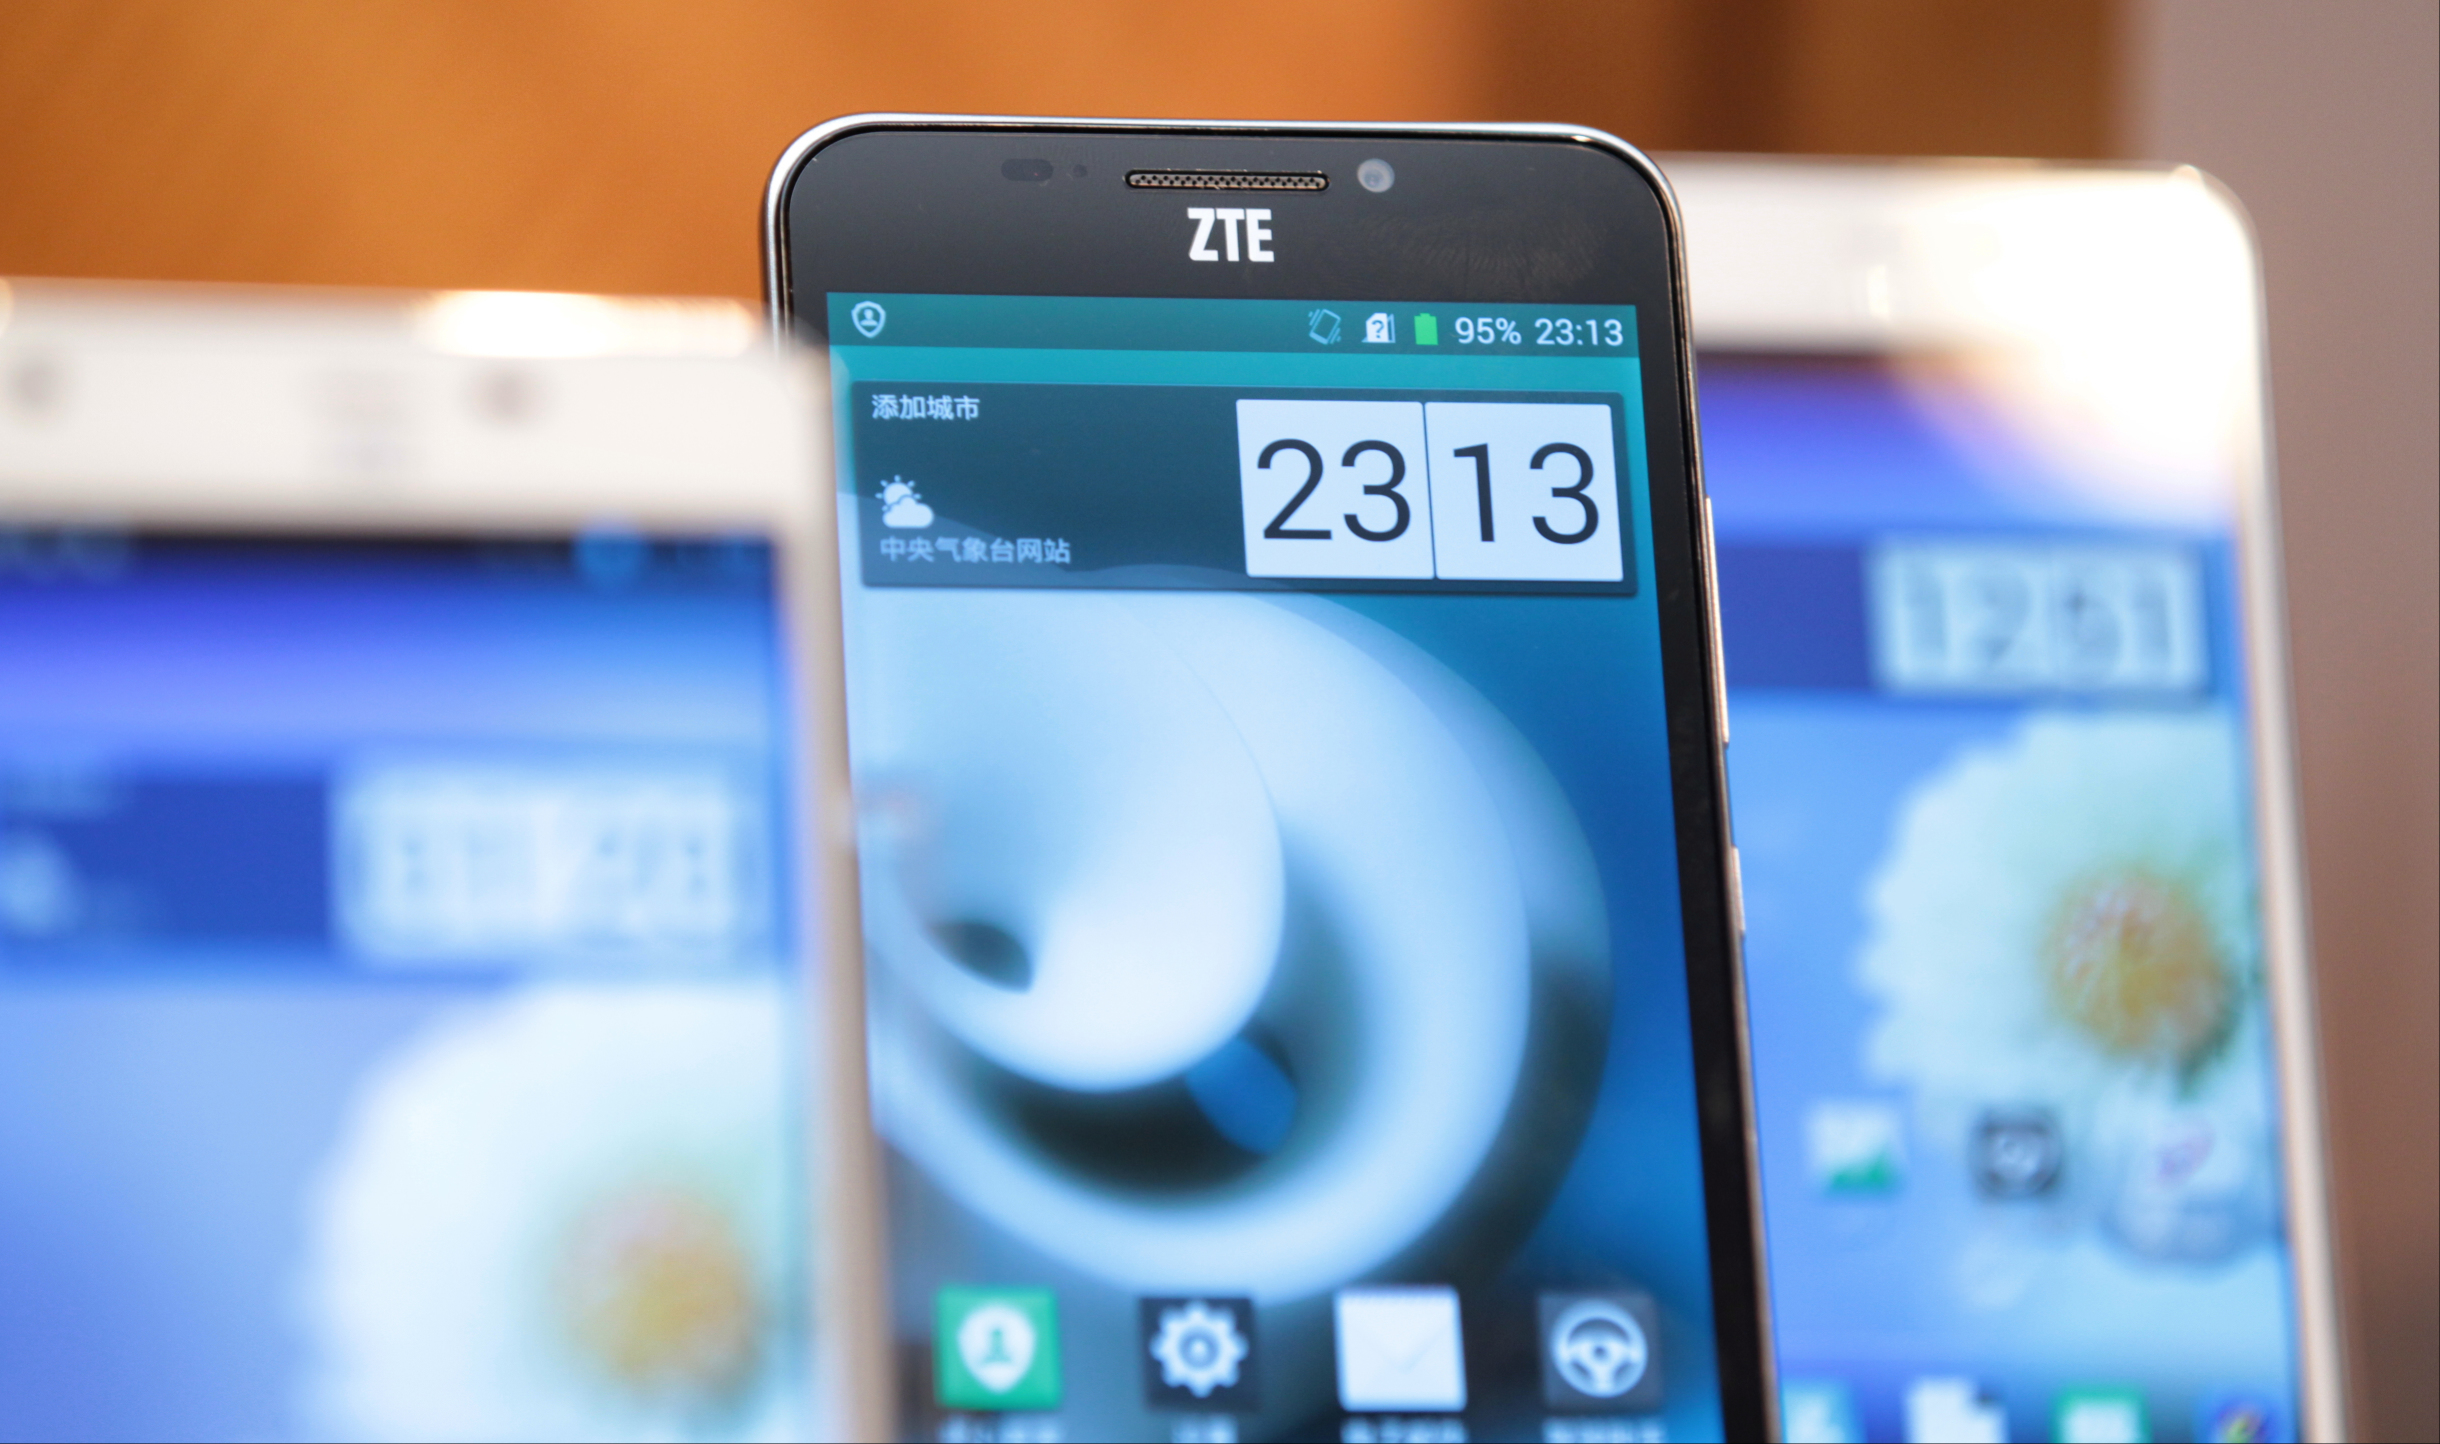 ZTE smartphones displayed at a press conference in Wan Chai. Photo: Thomas Yao